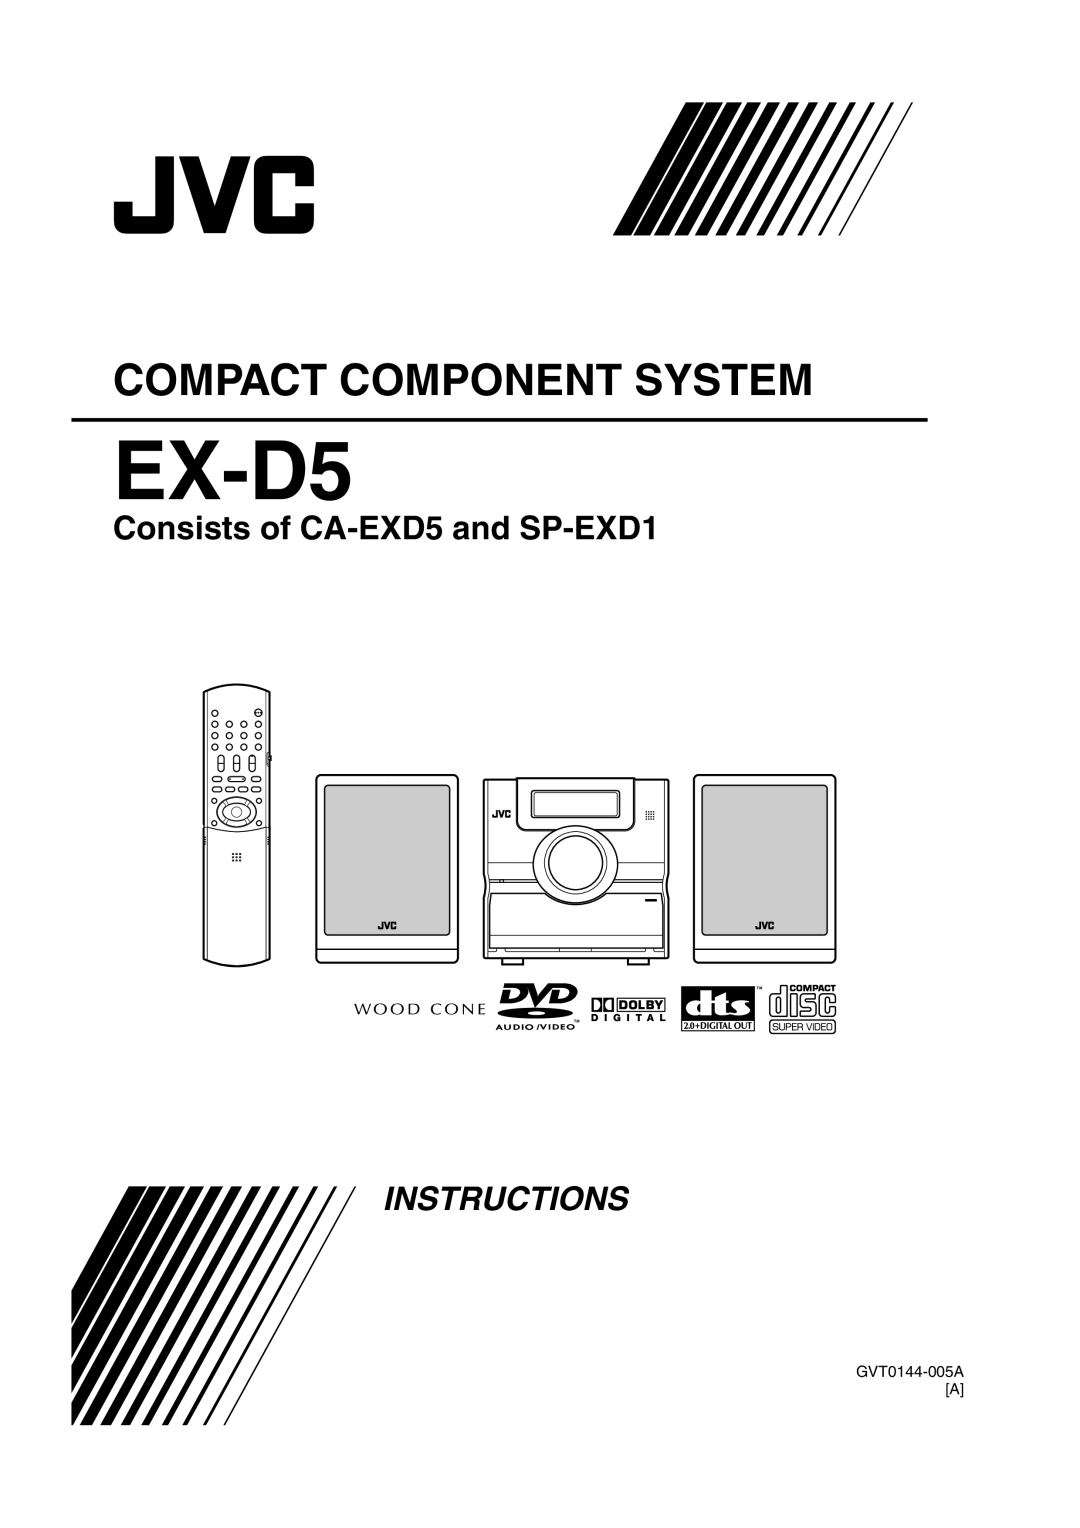 JVC GVT0144-005A manual EX-D5, Compact Component System, Consists of CA-EXD5and SP-EXD1, Instructions 